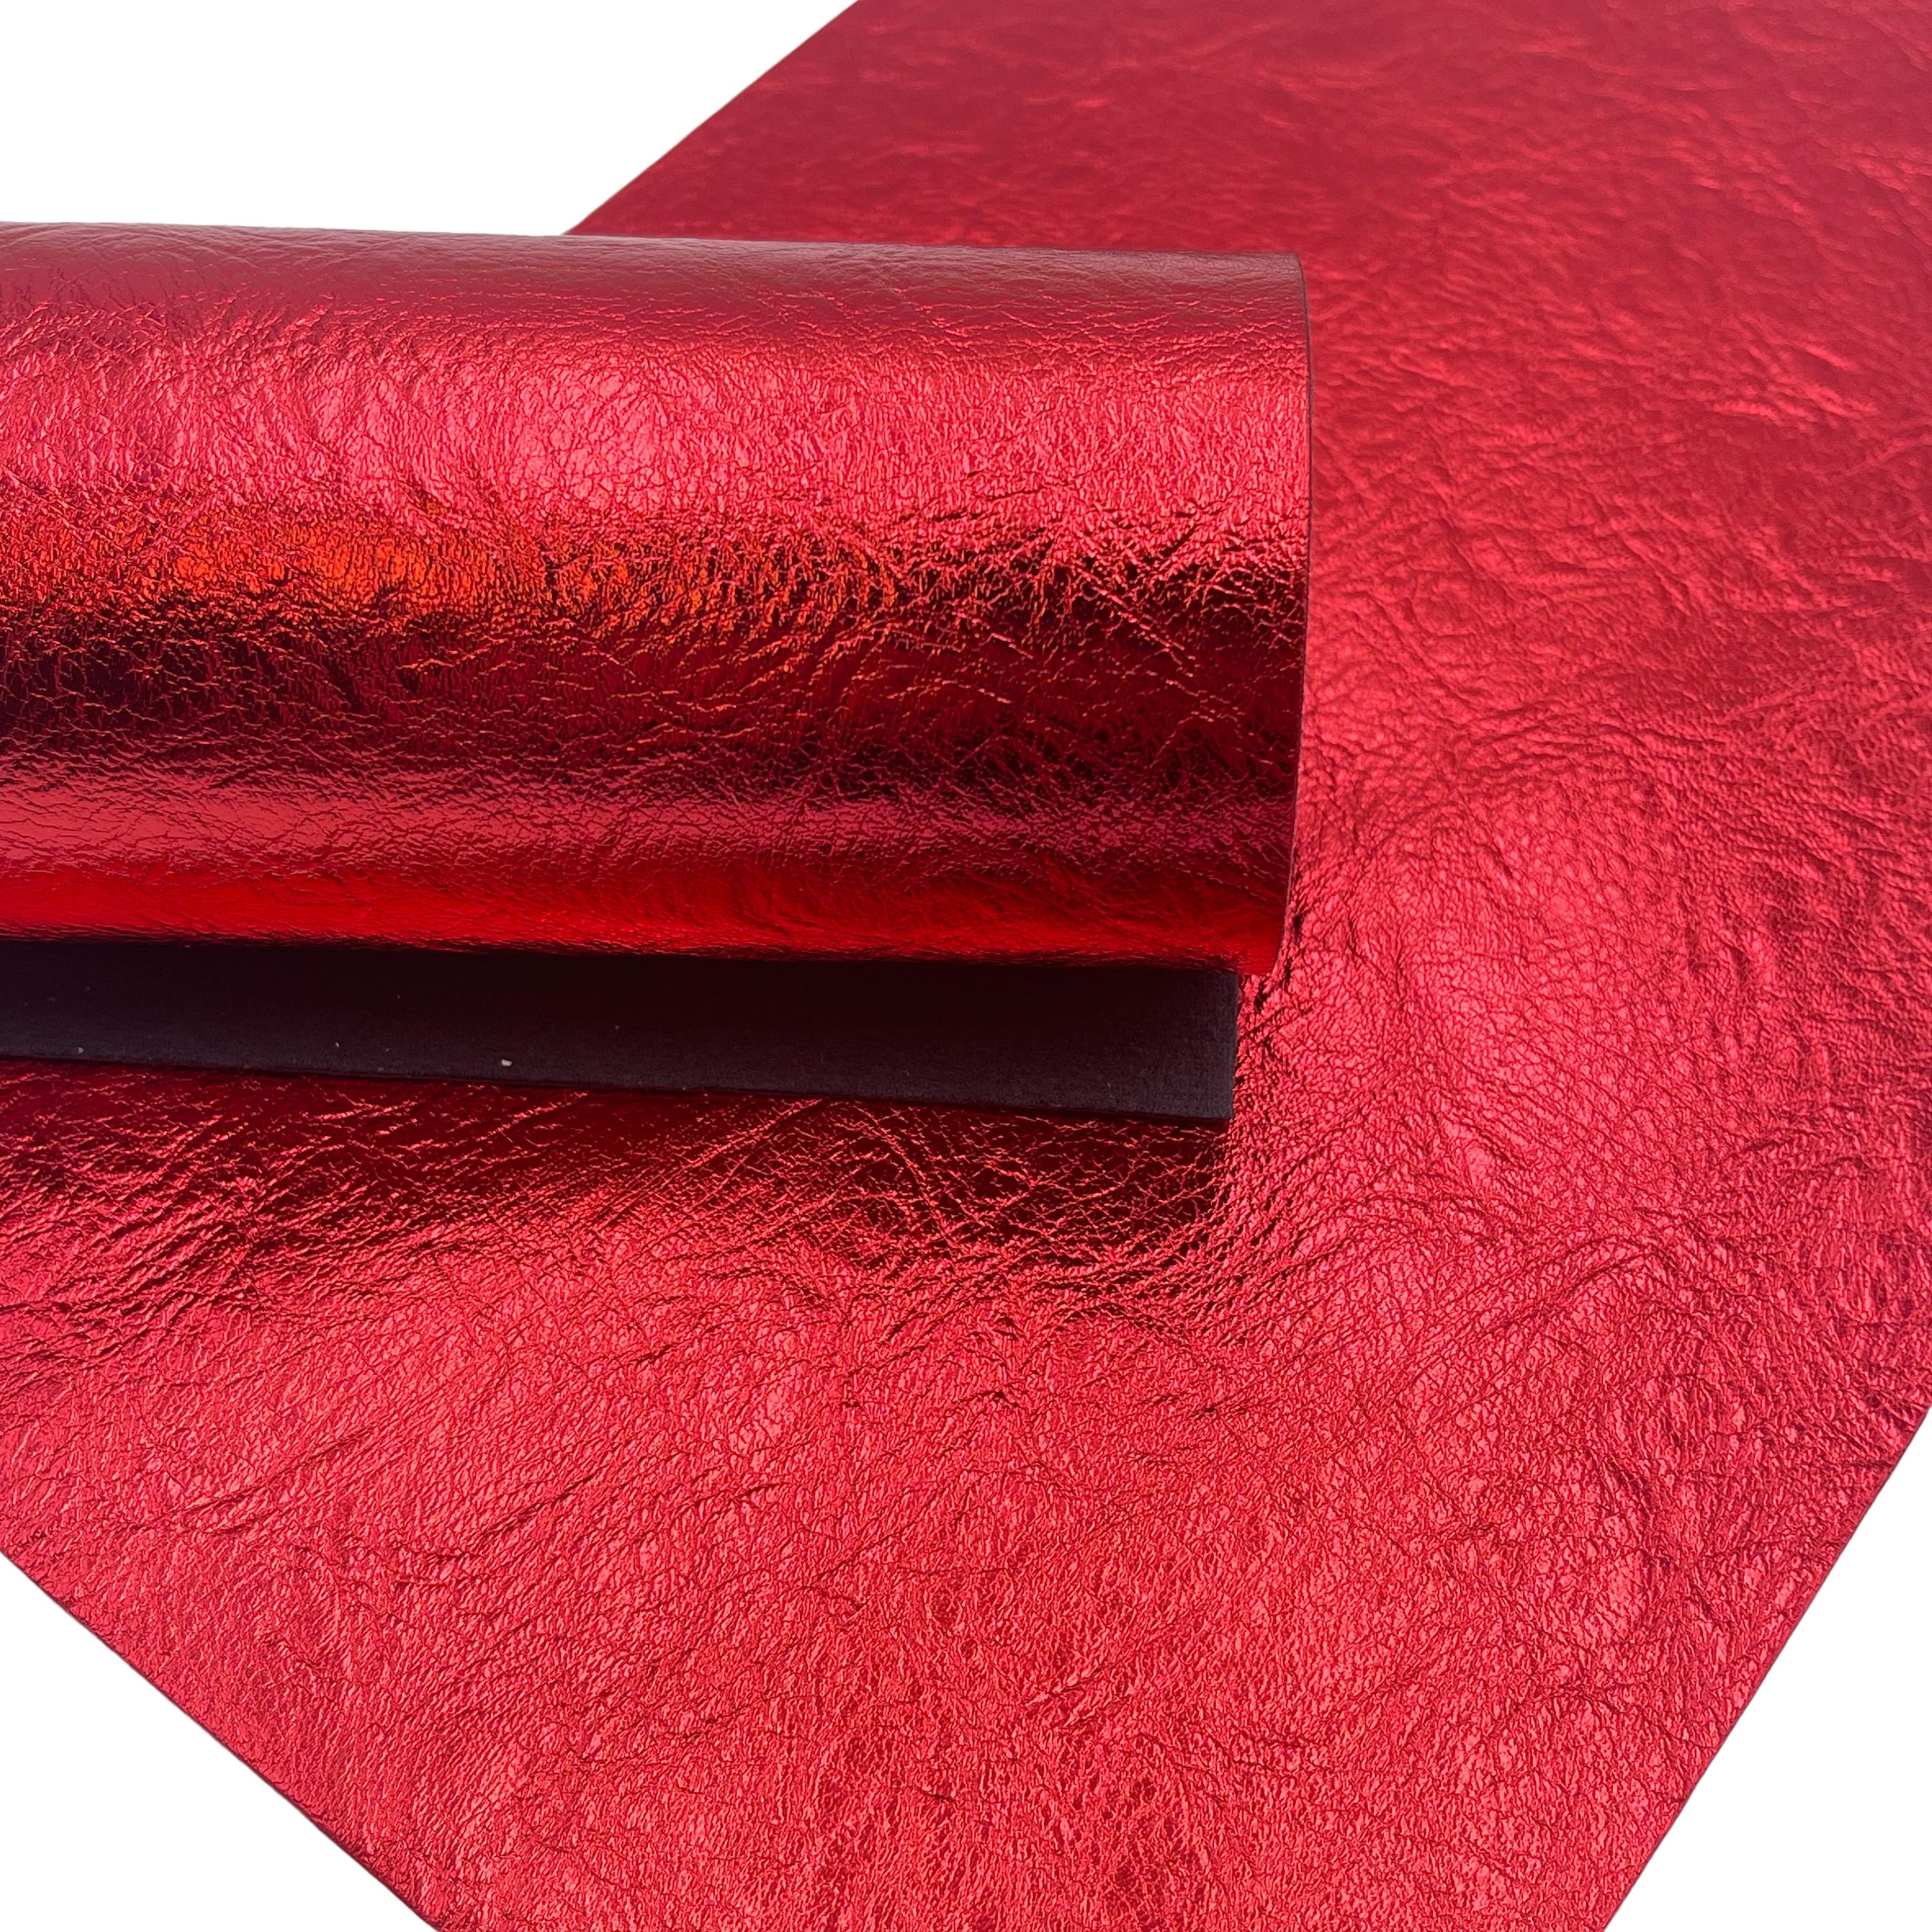 RED METALLIC Faux Leather Sheet PU Leather Leather for 